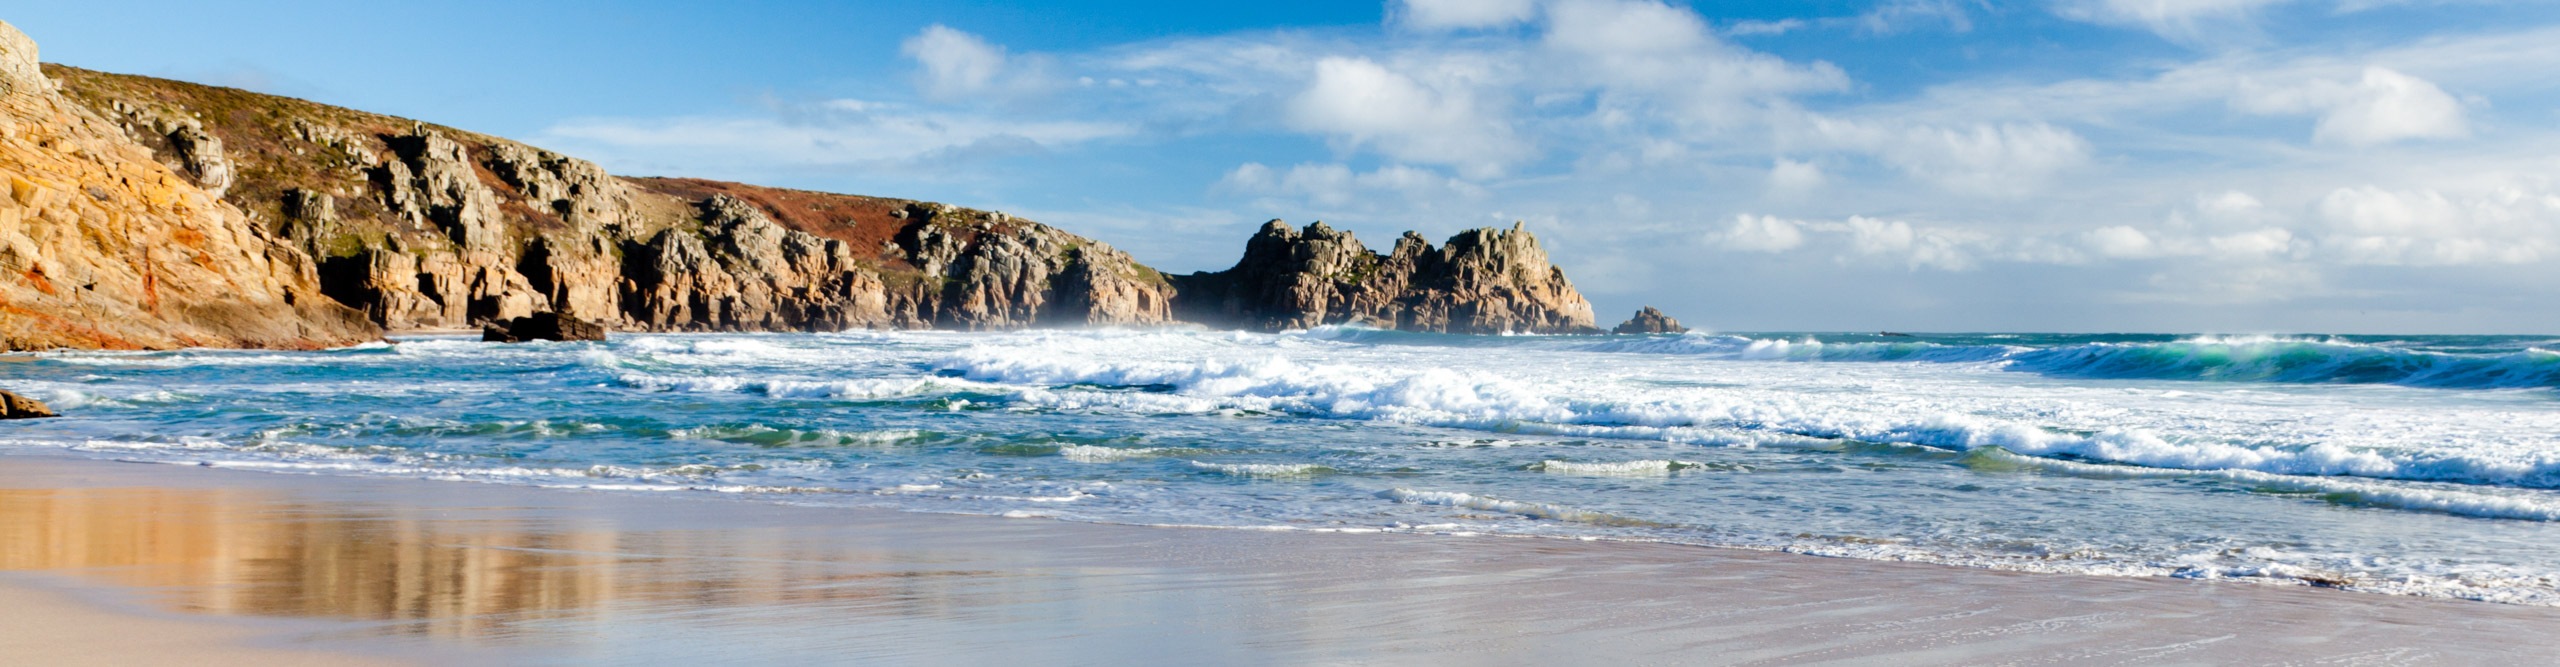 Waves crashing on a sandy beach in the late afternoon on a sunny day,  Porthcurno, Cornwall, UK